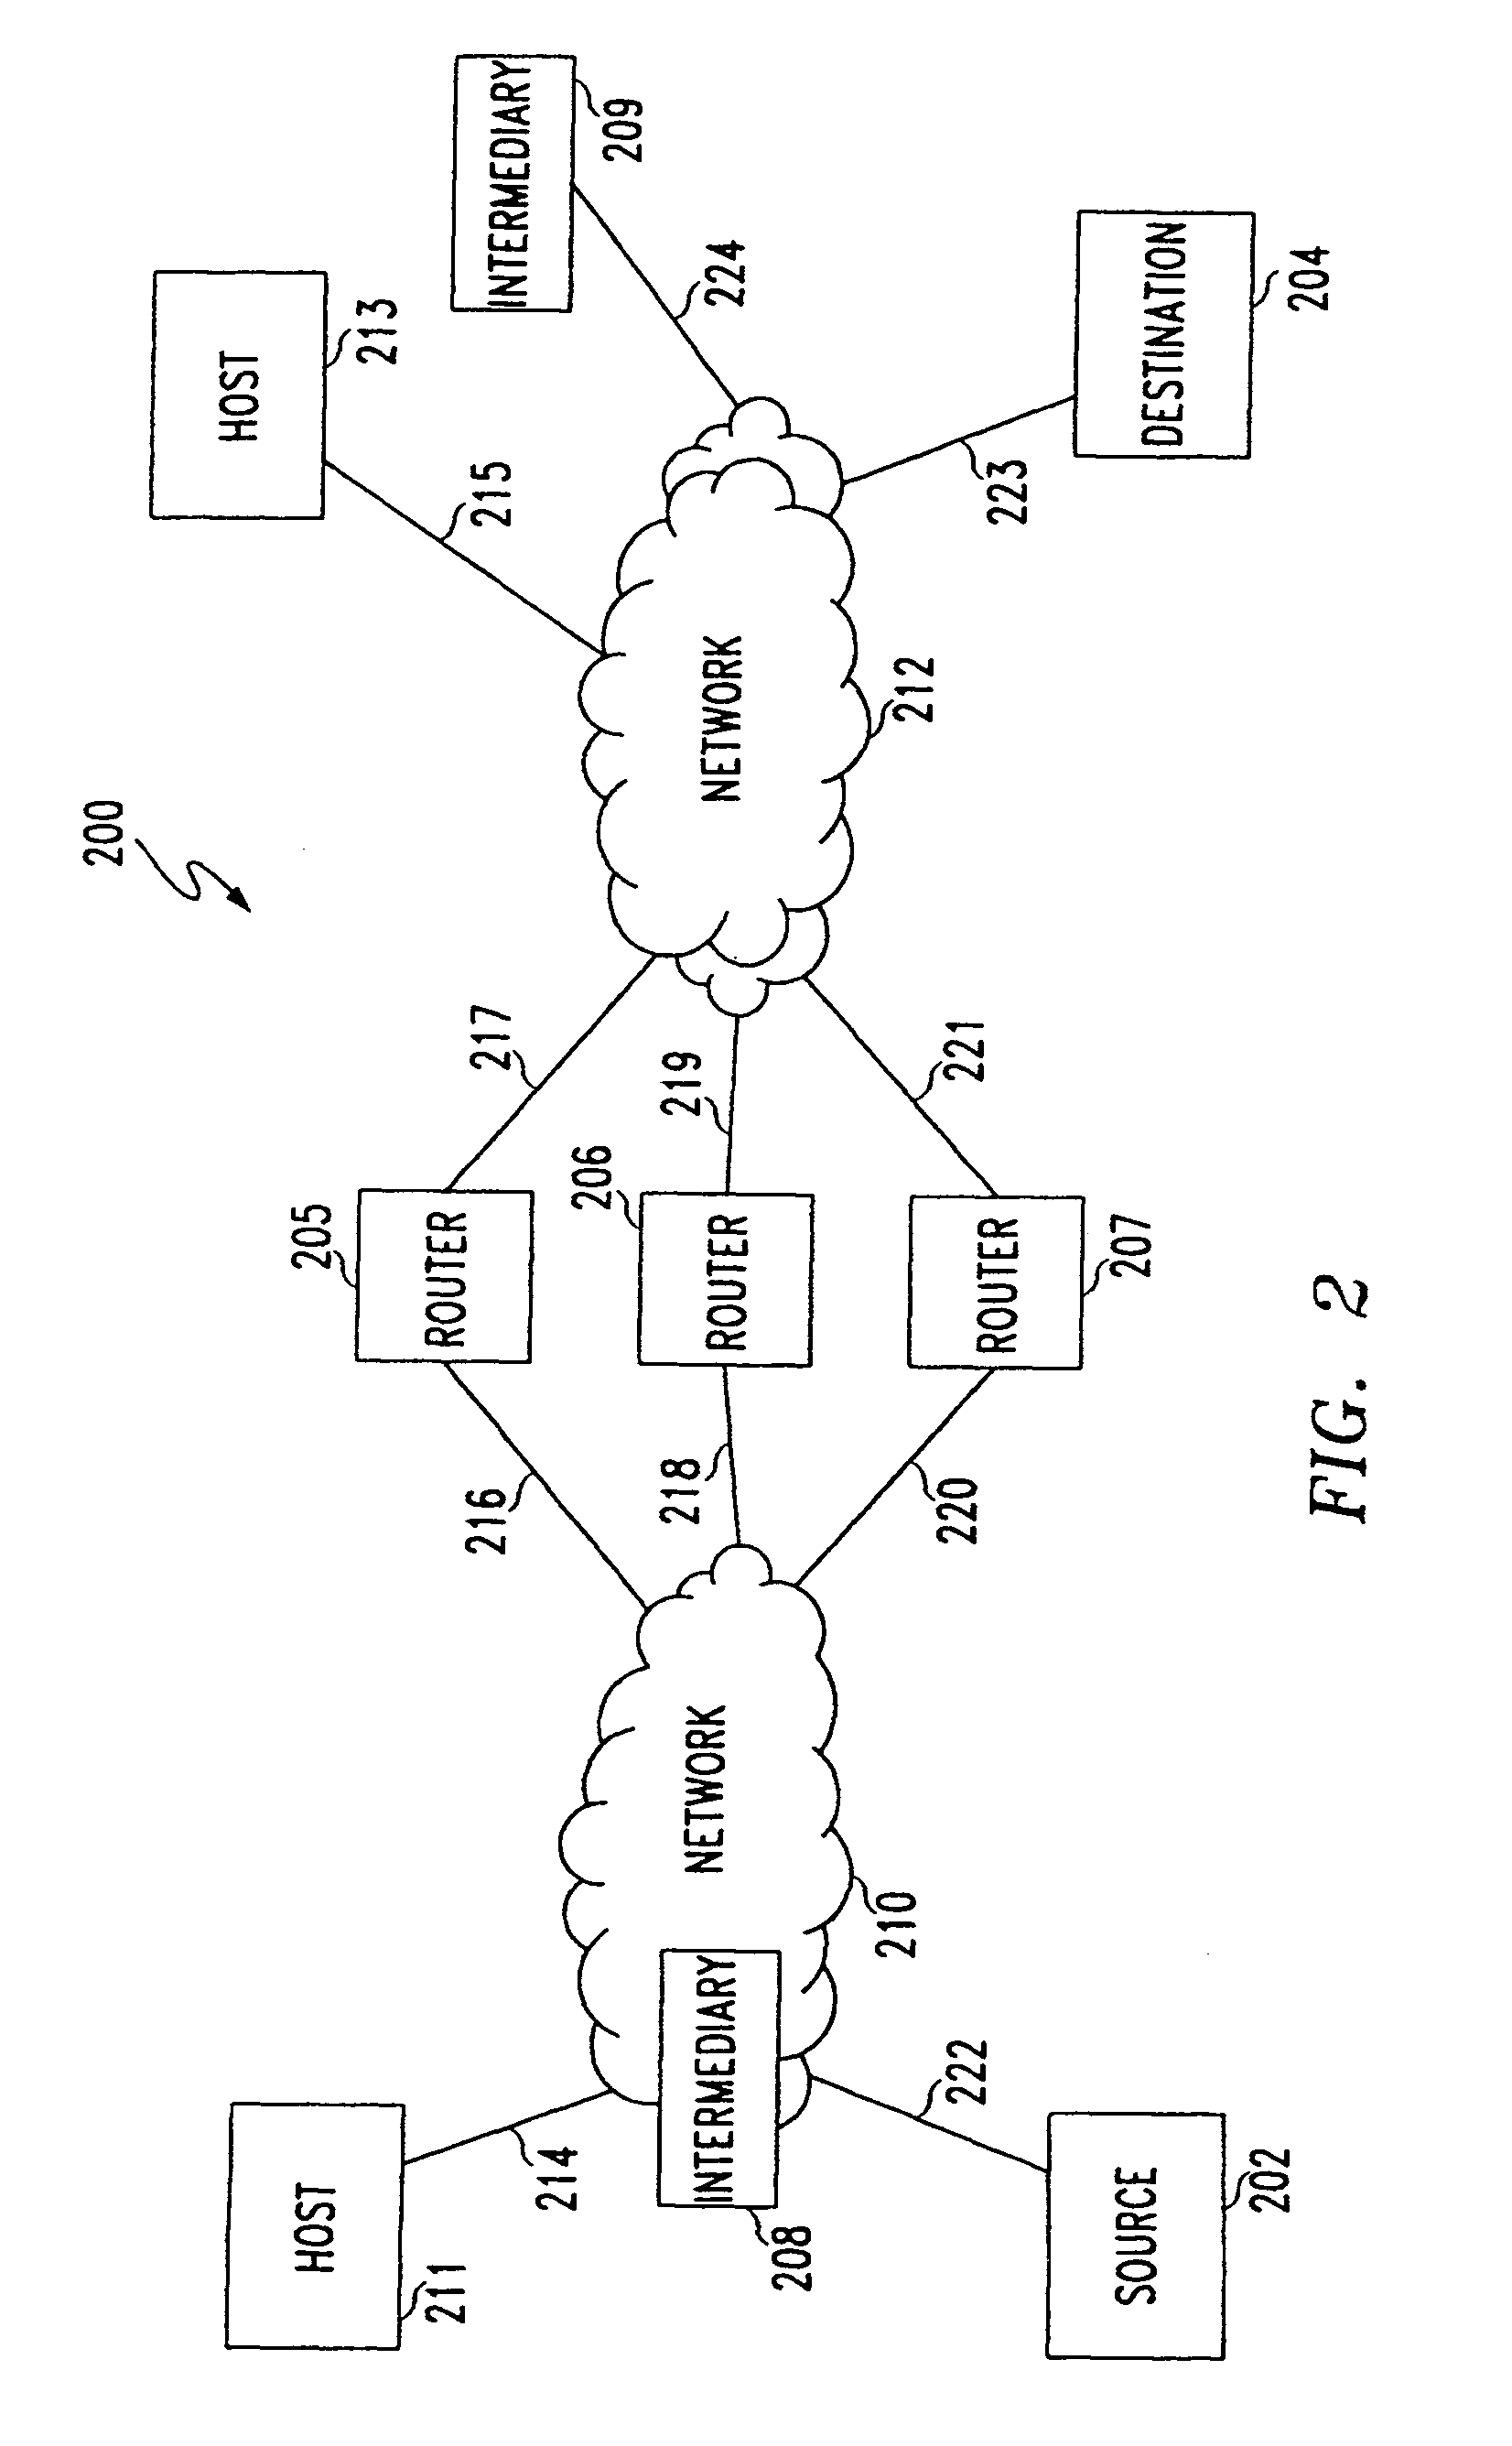 Apparatus and methods for providing translucent proxies in a communications network